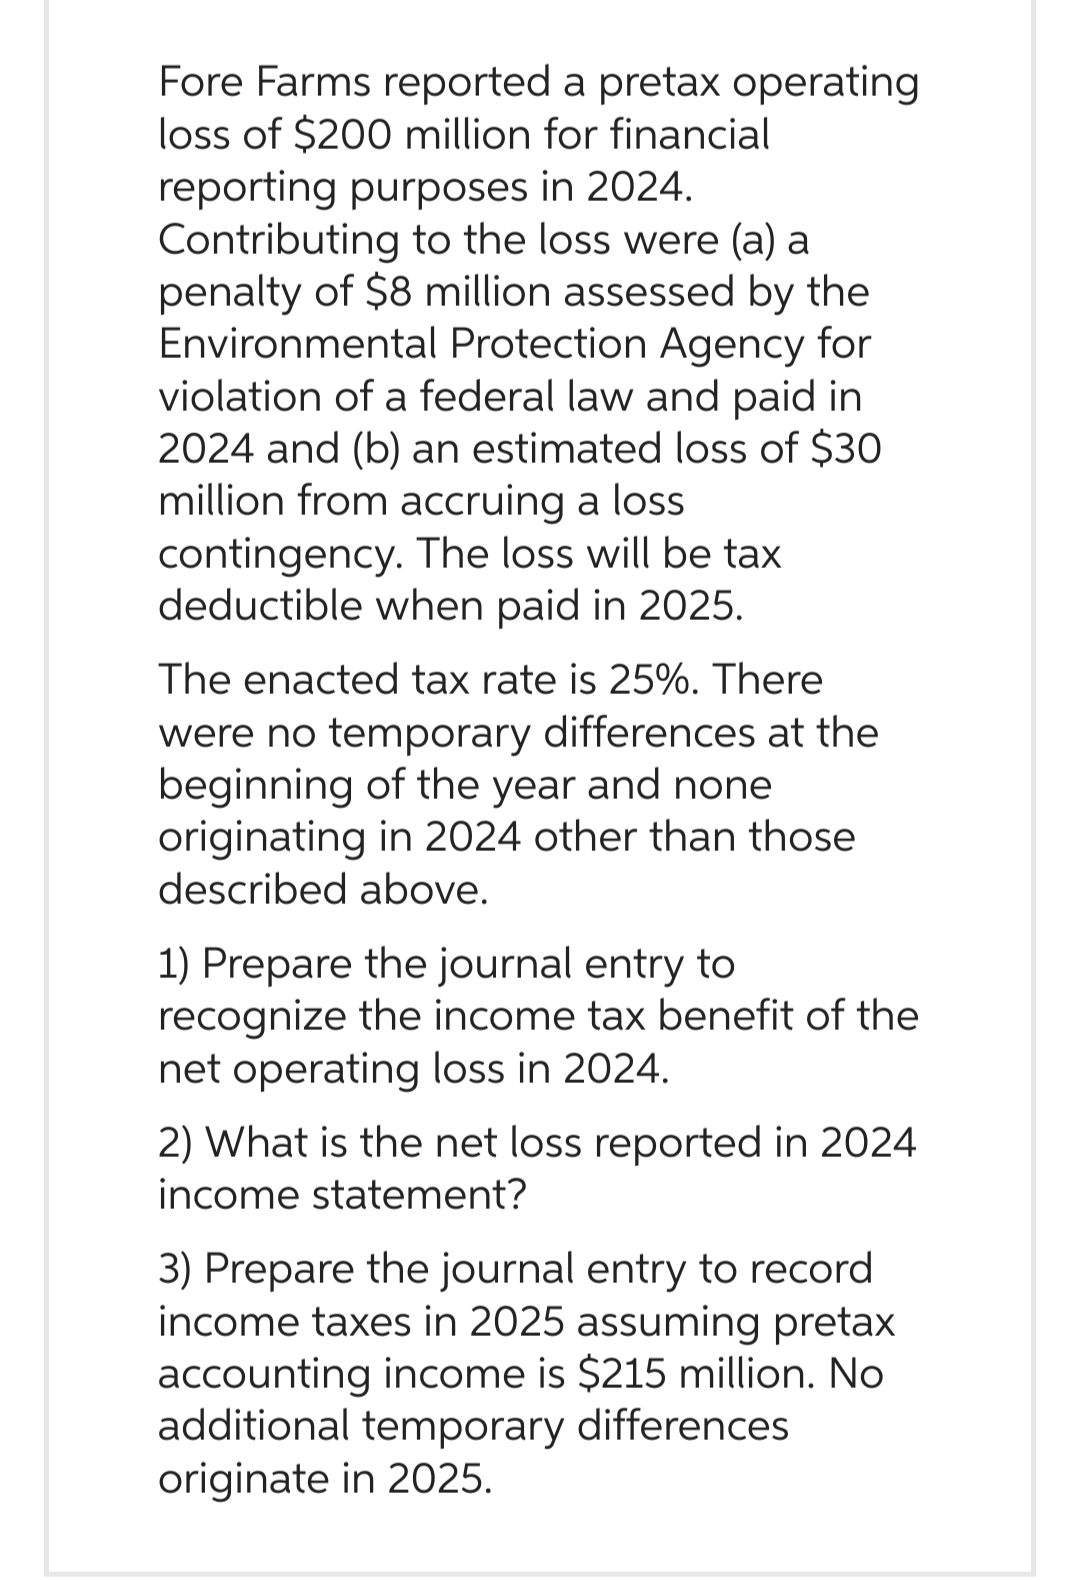 Fore Farms reported a pretax operating
loss of $200 million for financial
reporting purposes in 2024.
Contributing to the loss were (a) a
penalty of $8 million assessed by the
Environmental Protection Agency for
violation of a federal law and paid in
2024 and (b) an estimated loss of $30
million from accruing a loss
contingency. The loss will be tax
deductible when paid in 2025.
The enacted tax rate is 25%. There
were no temporary differences at the
beginning of the year and none
originating in 2024 other than those
described above.
1) Prepare the journal entry to
recognize the income tax benefit of the
net operating loss in 2024.
2) What is the net loss reported in 2024
income statement?
3) Prepare the journal entry to record
income taxes in 2025 assuming pretax
accounting income is $215 million. No
additional temporary differences
originate in 2025.